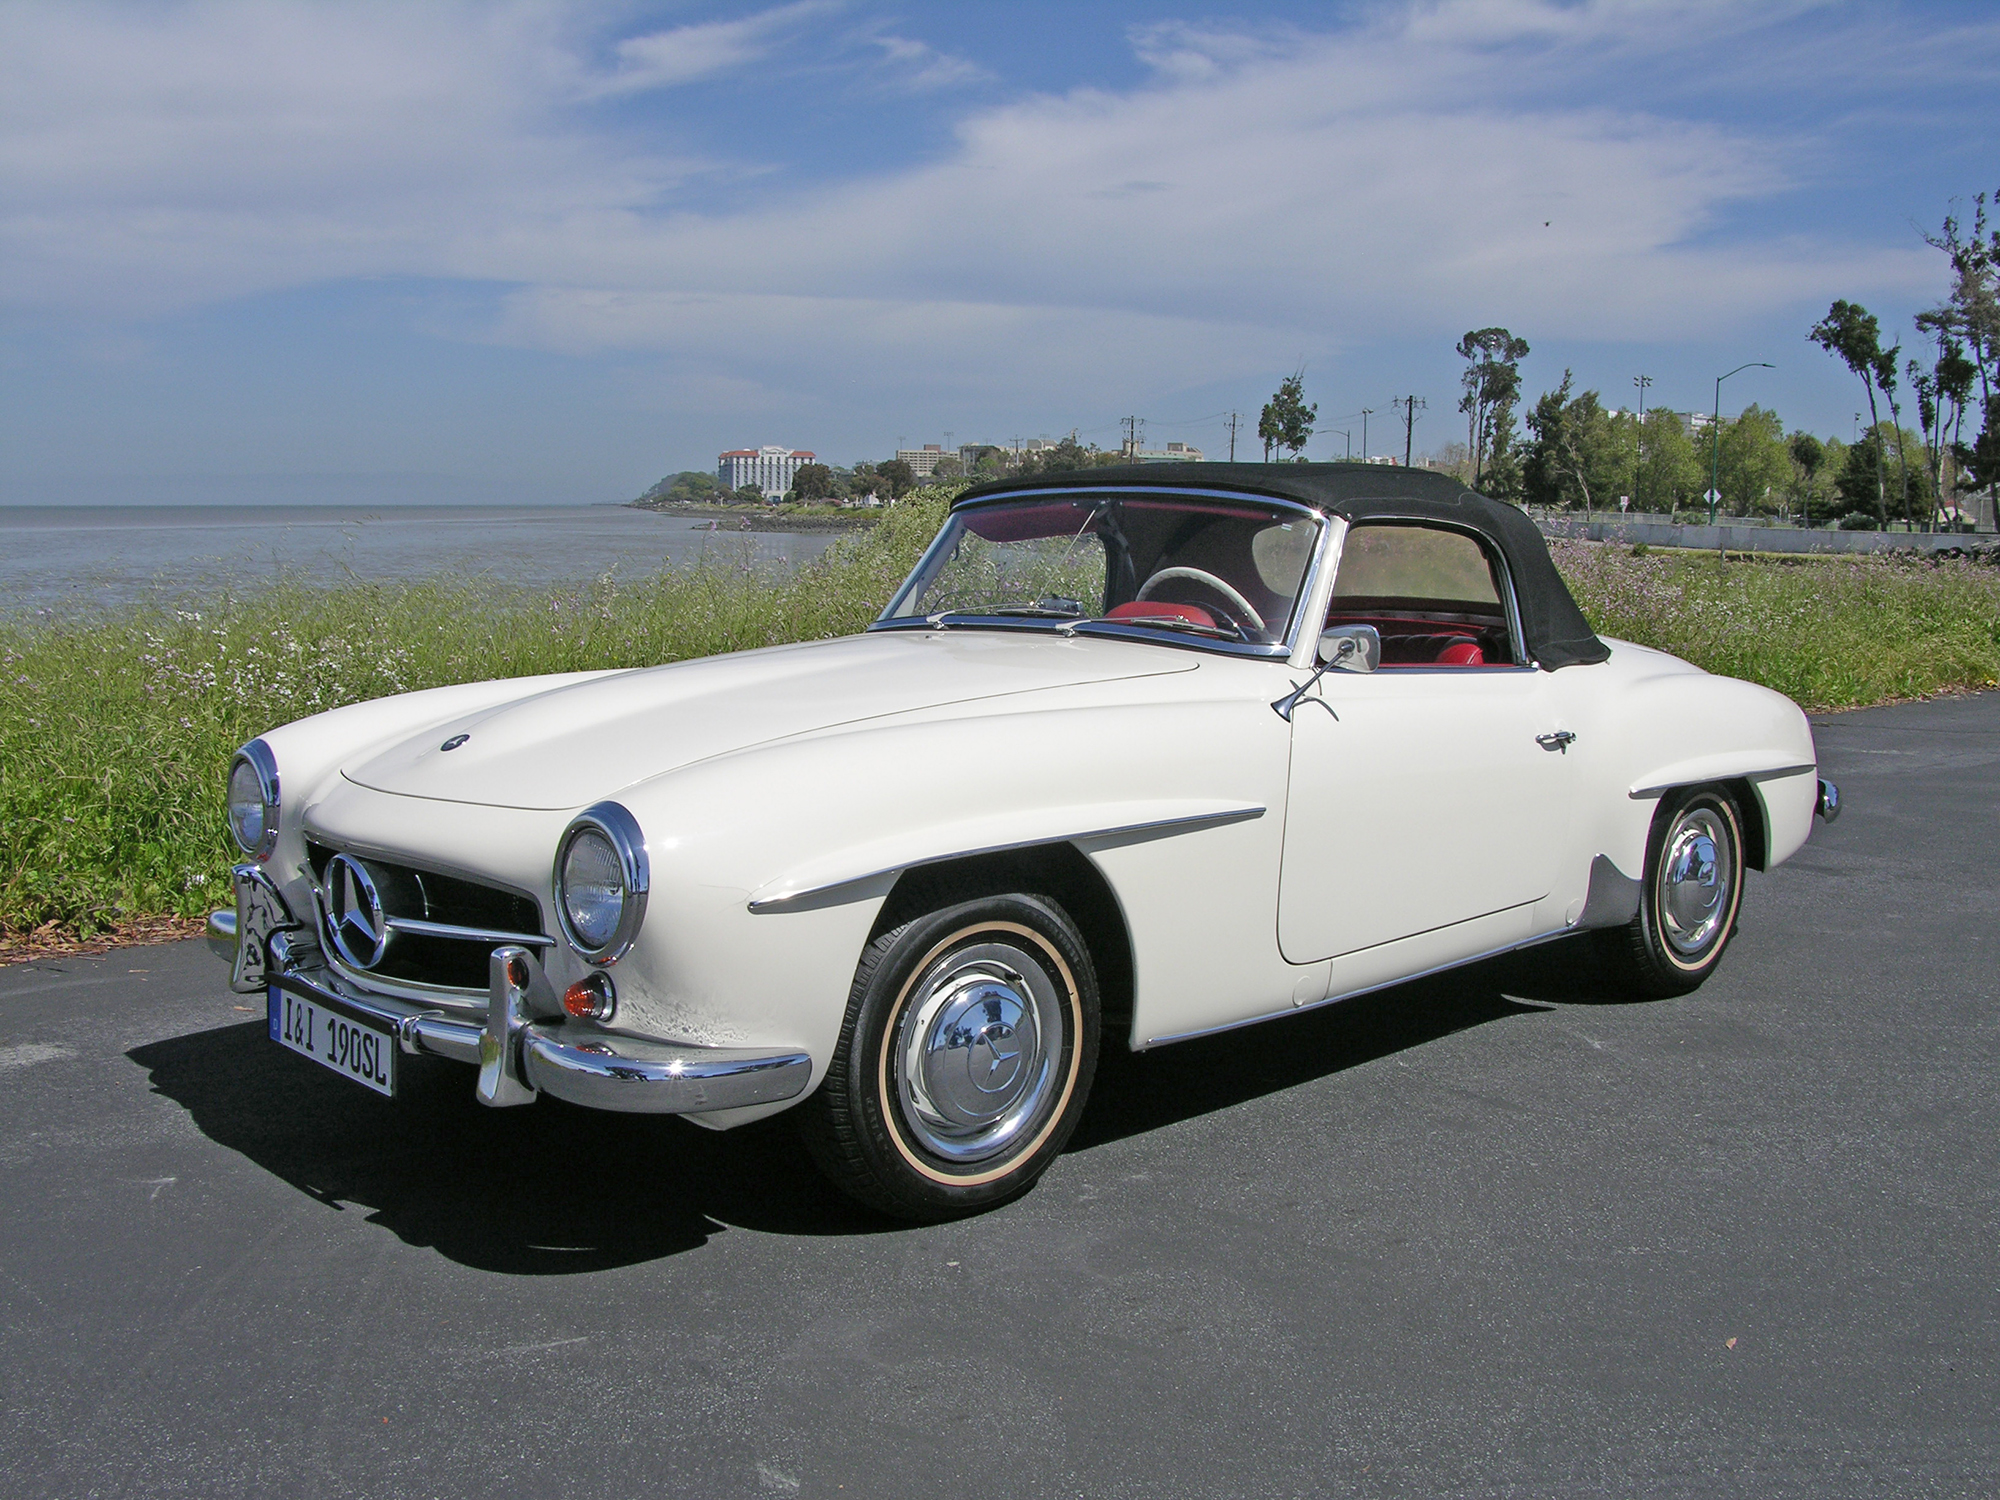 1960 190SL - White/Red - California From New - An Entry Level 190SL